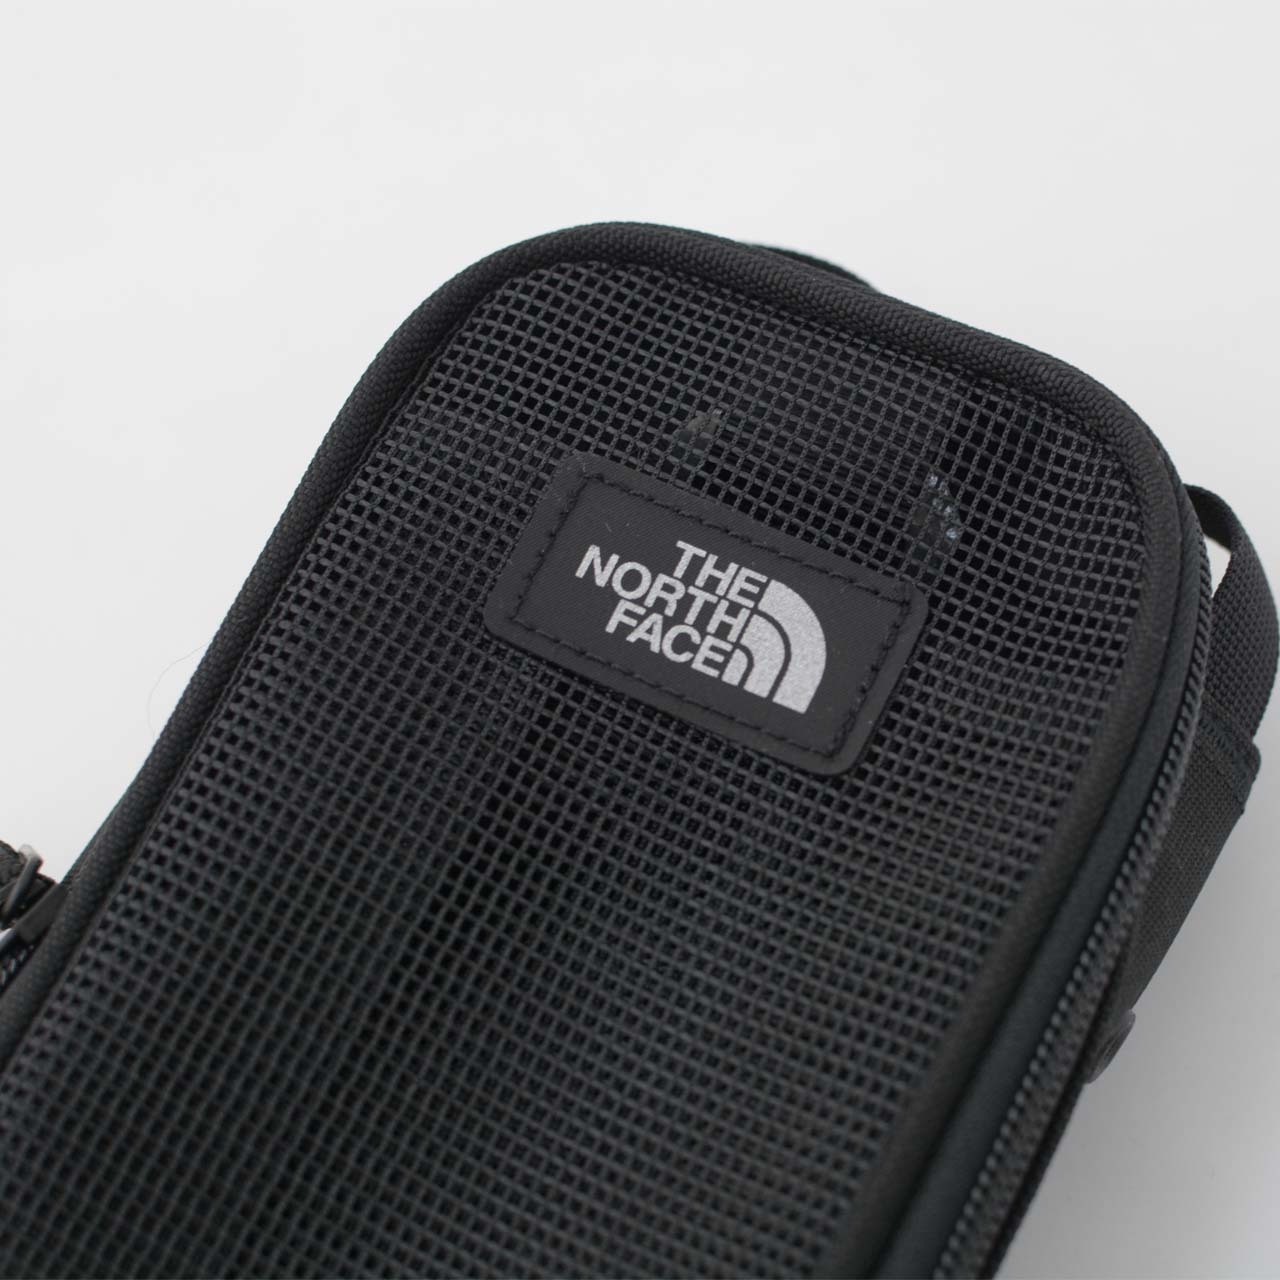 THE NORTH FACE [ザ・ノース・フェイス] Fieludens Cutlery Case M [NM82211]_f0051306_09293455.jpg